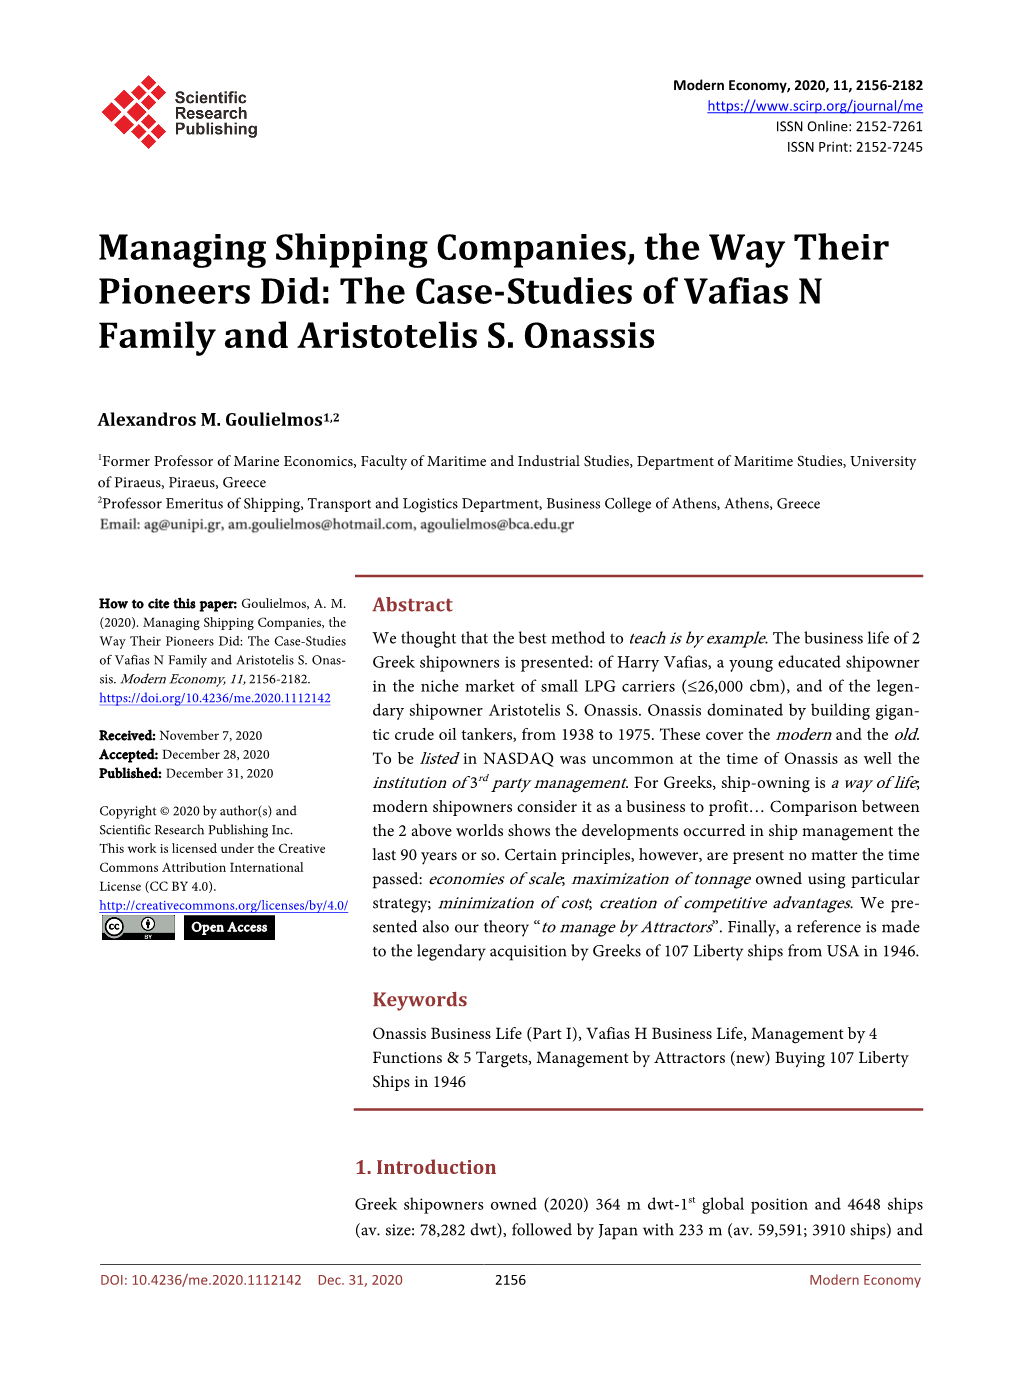 Managing Shipping Companies, the Way Their Pioneers Did: the Case-Studies of Vafias N Family and Aristotelis S. Onassis